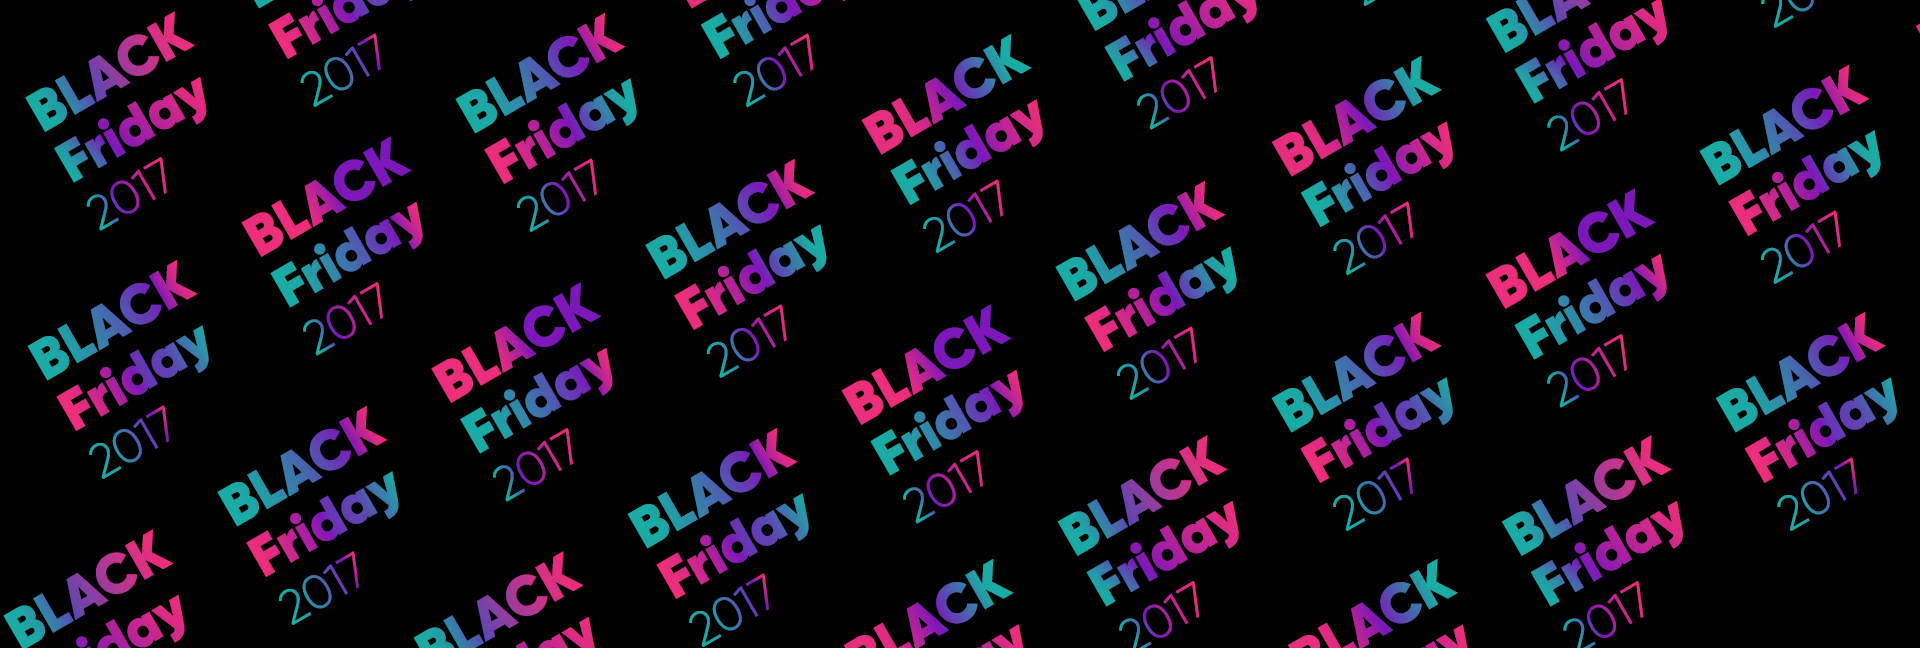 Black Friday 2017 deals for graphic designers